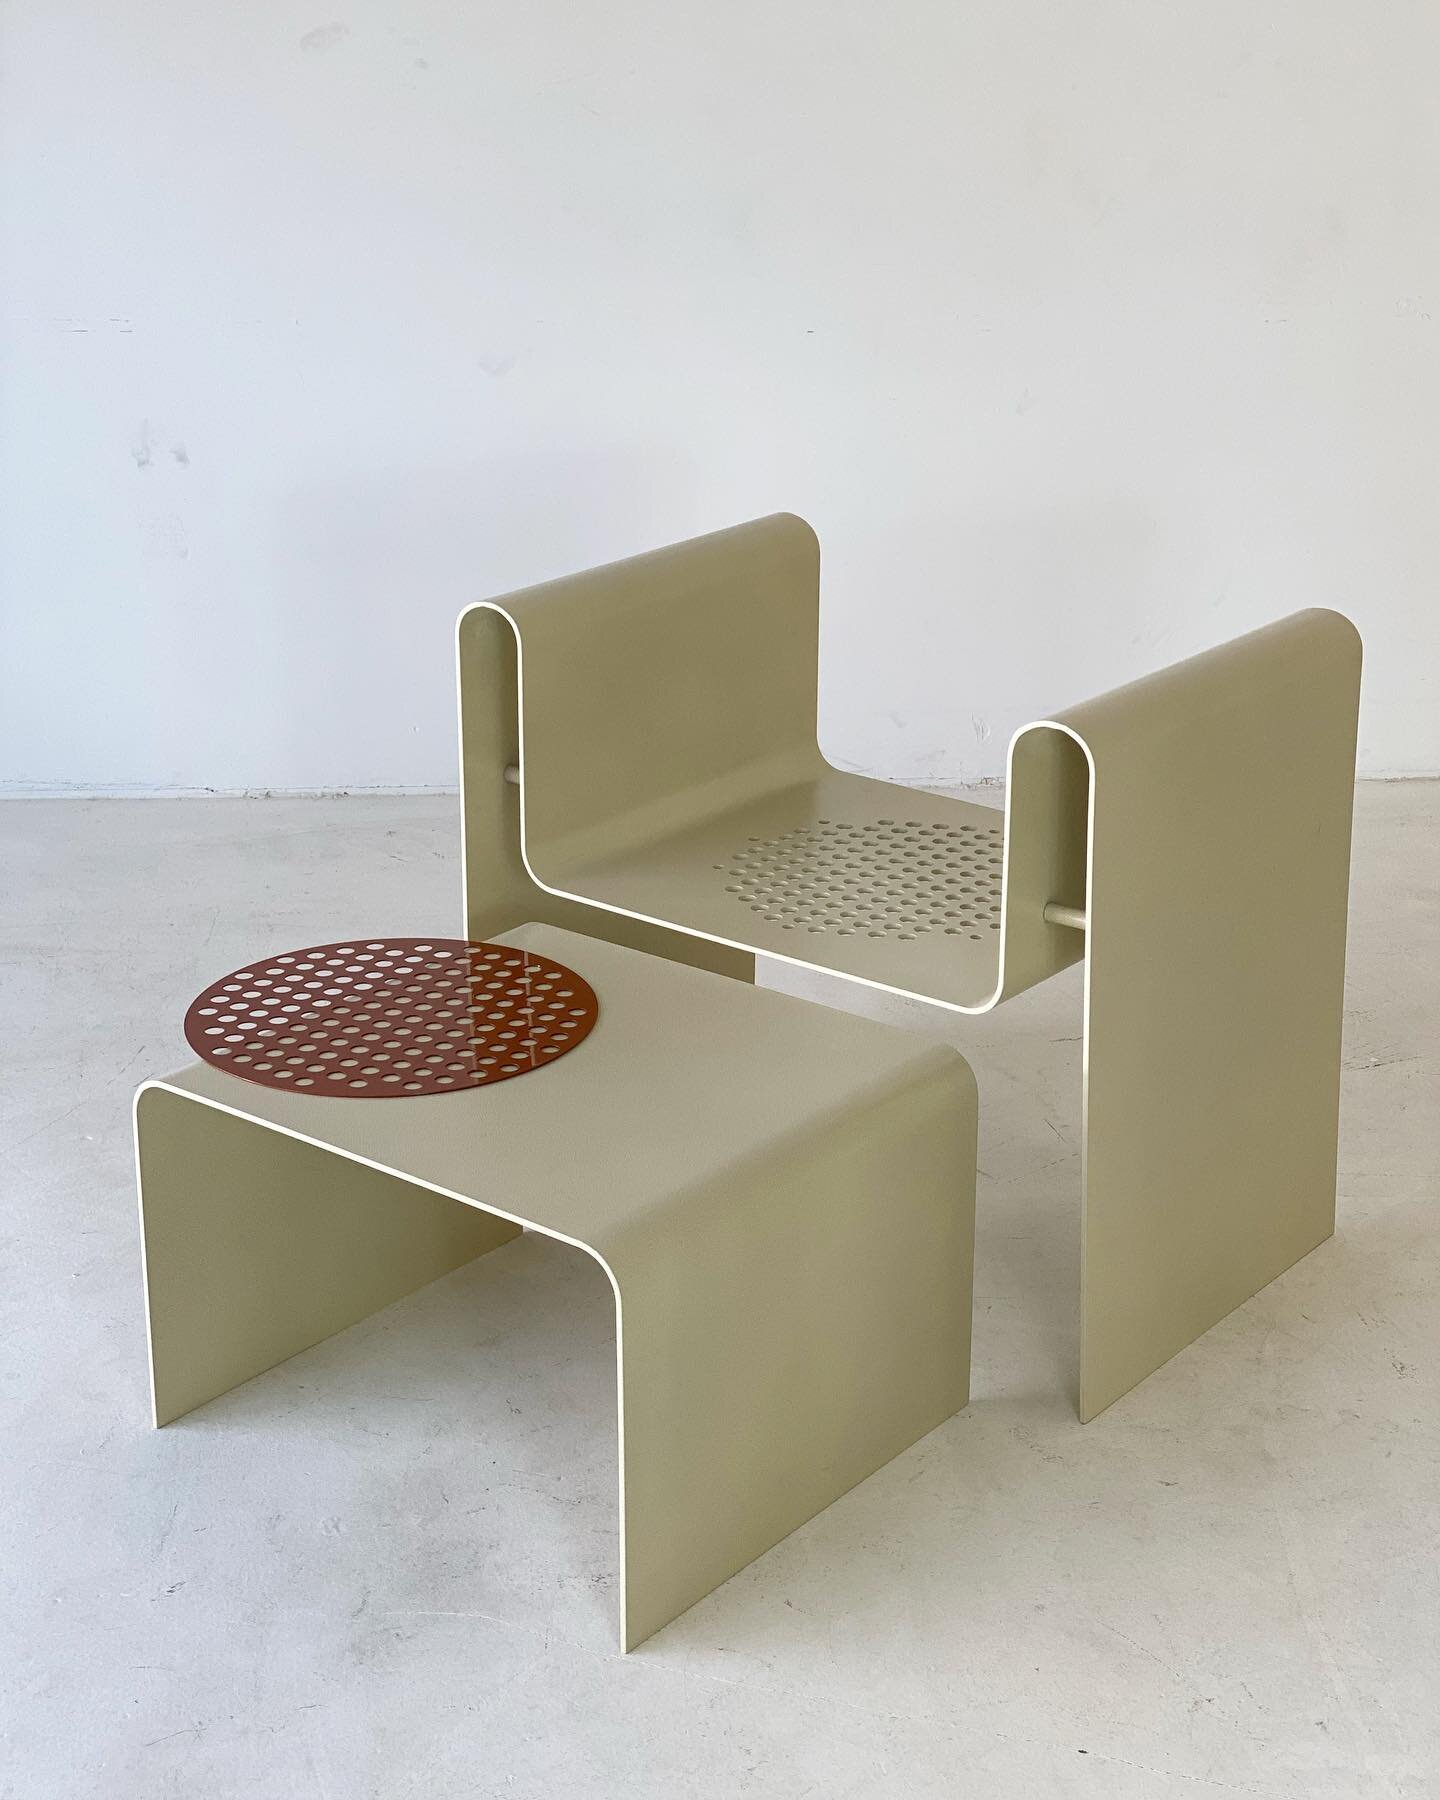 Meet our new MoNO double arm chair, pulling out all the curves for a silhouette that is so sexy. With a perforated circular seat and made of lightweight aluminum, this chair can be used indoors or outdoors. We based it loosely on the No. 14 bistro ch